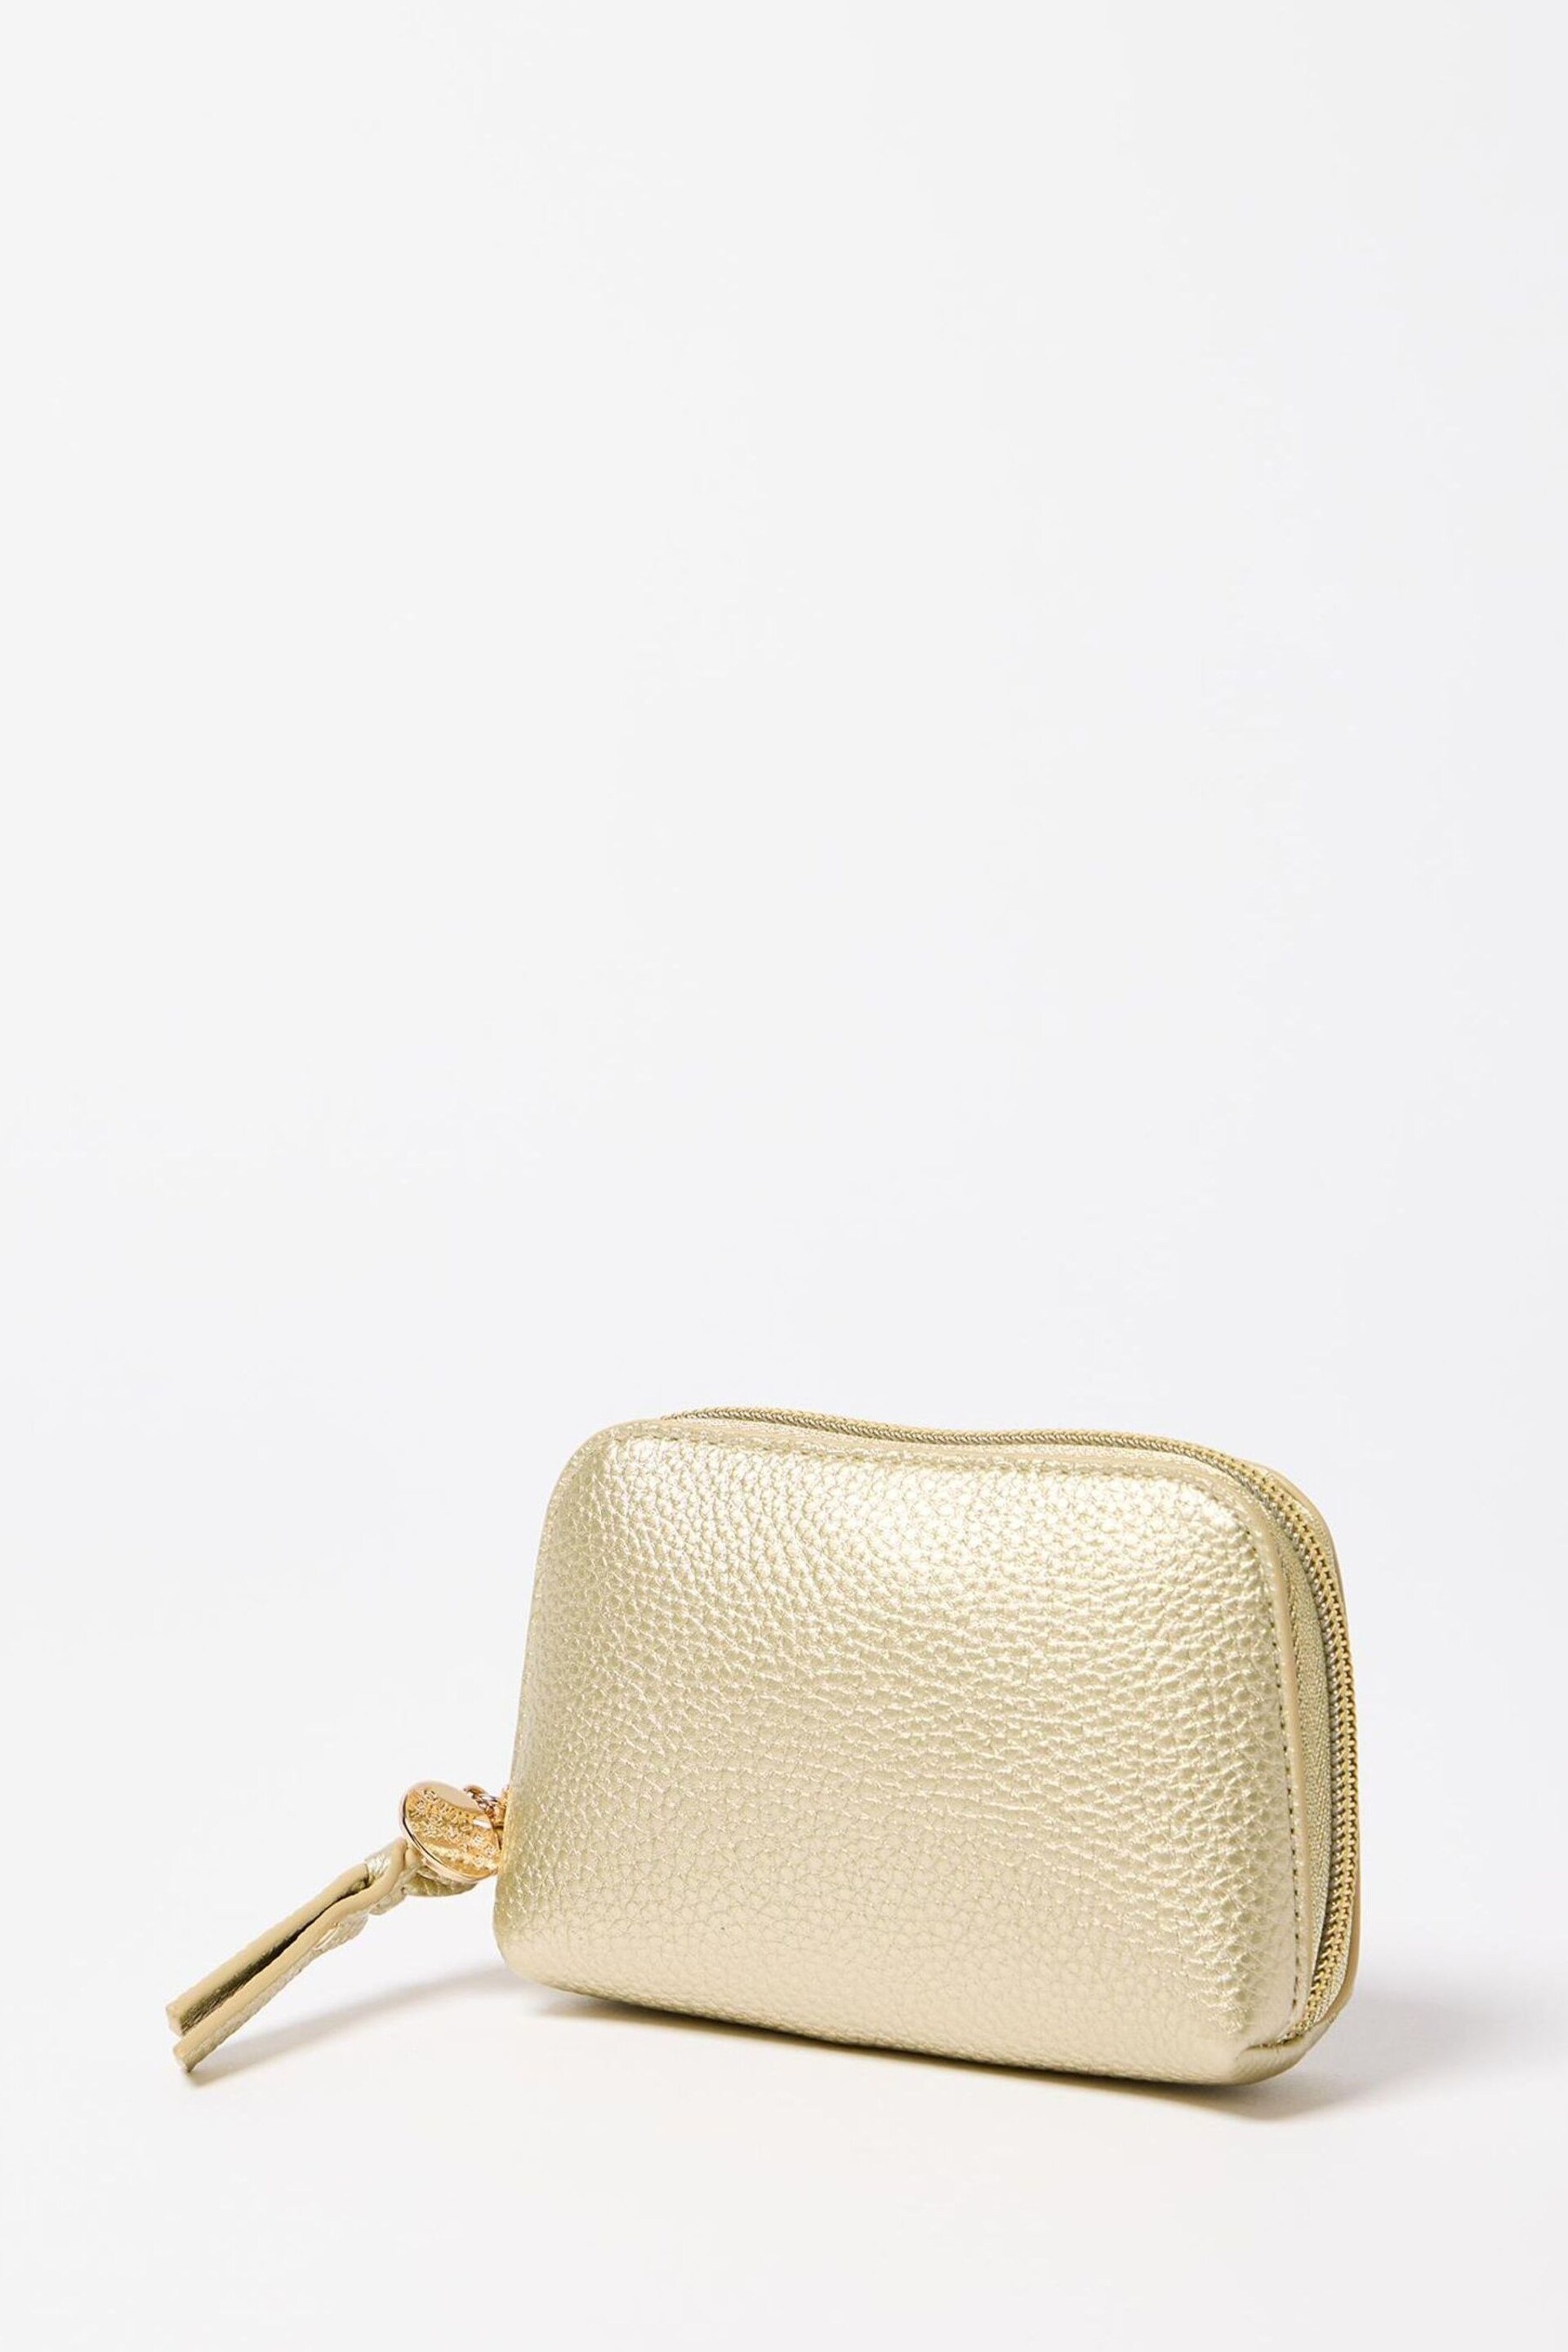 Oliver Bonas Gold Holly Zip Around Pouch - Image 2 of 6